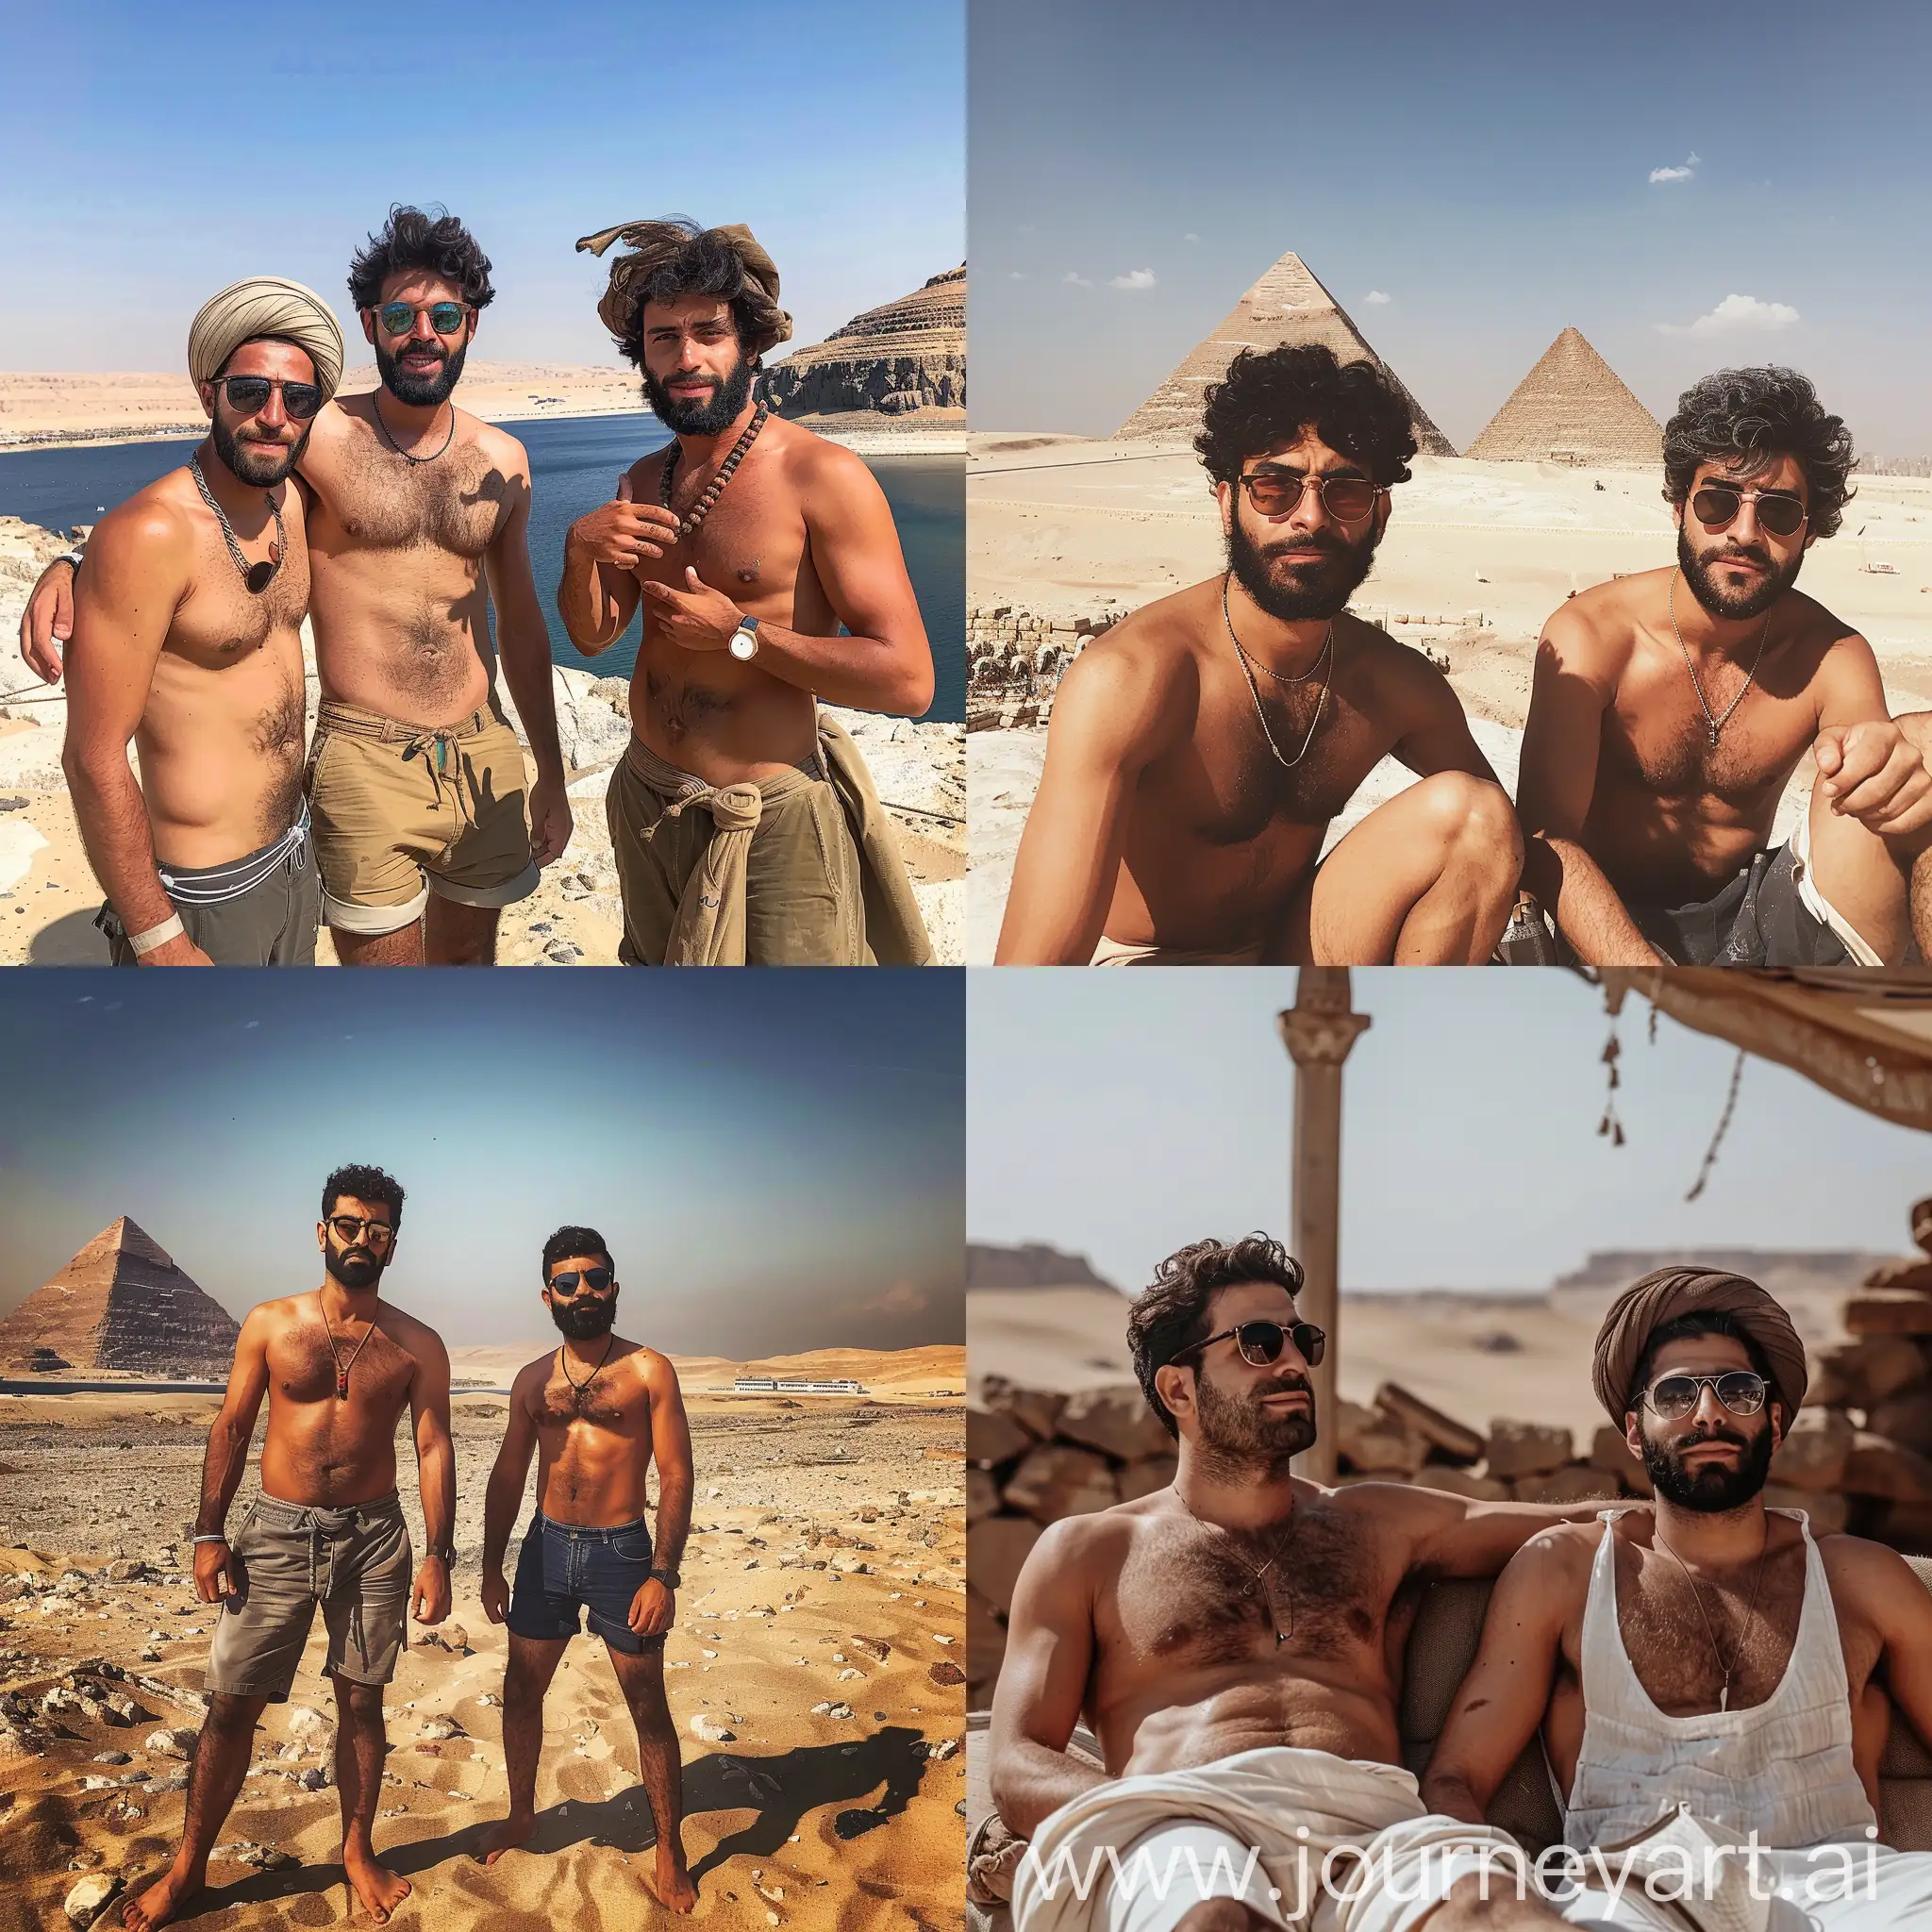 Tanned-Iranian-Friends-Enjoying-Vacation-in-Egypt